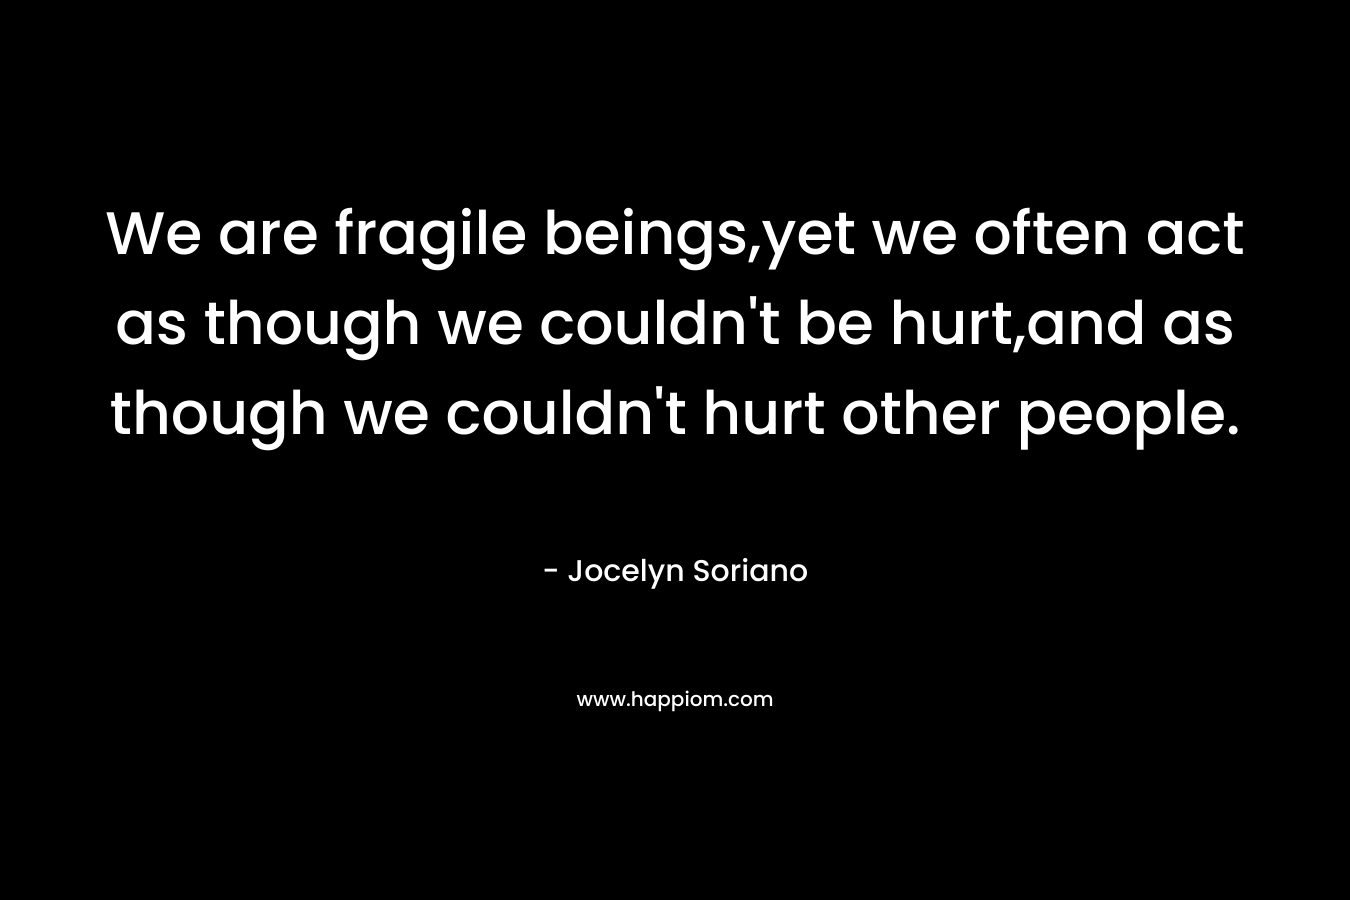 We are fragile beings,yet we often act as though we couldn't be hurt,and as though we couldn't hurt other people.